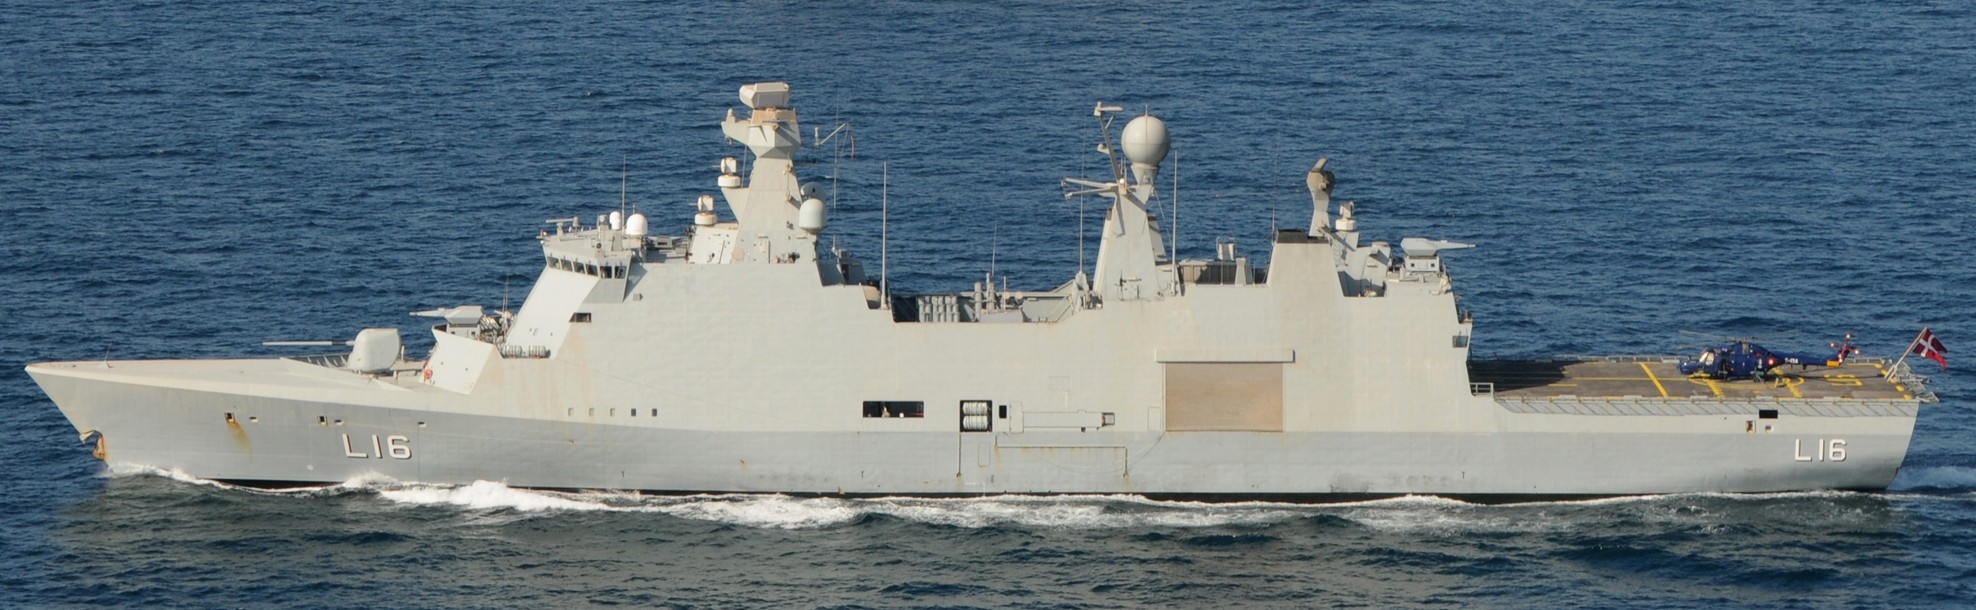 l-16 hdms absalon command support ship frigate royal danish navy 94